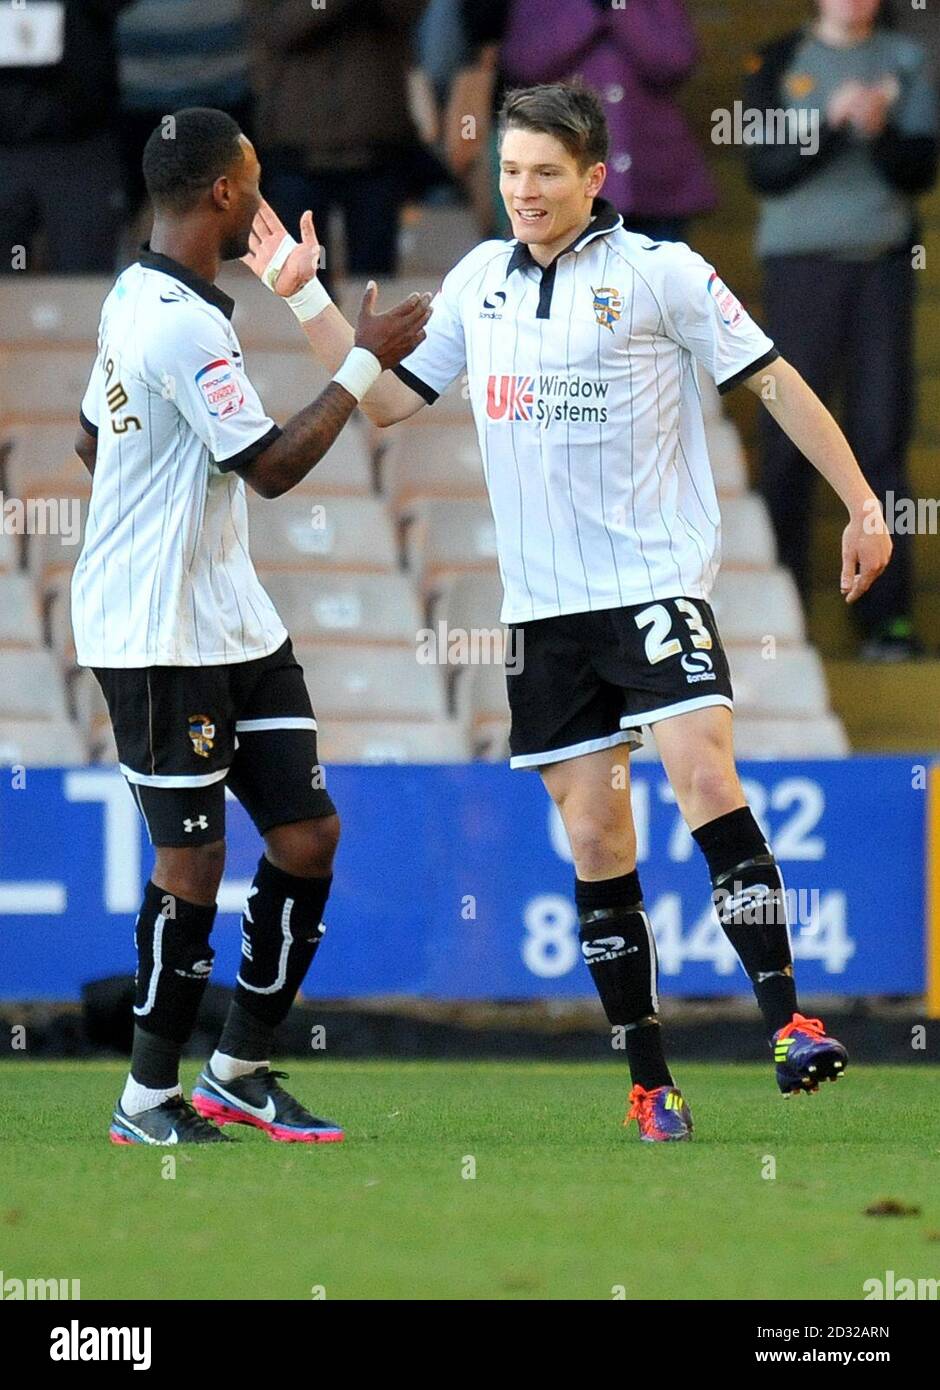 Port Vale's Jennison Myrie Williams (left) congratulates team-mate Ryan Burge on scoring their opening goal during the npower Football League Two match at Vale Park, Stoke On Trent. Stock Photo